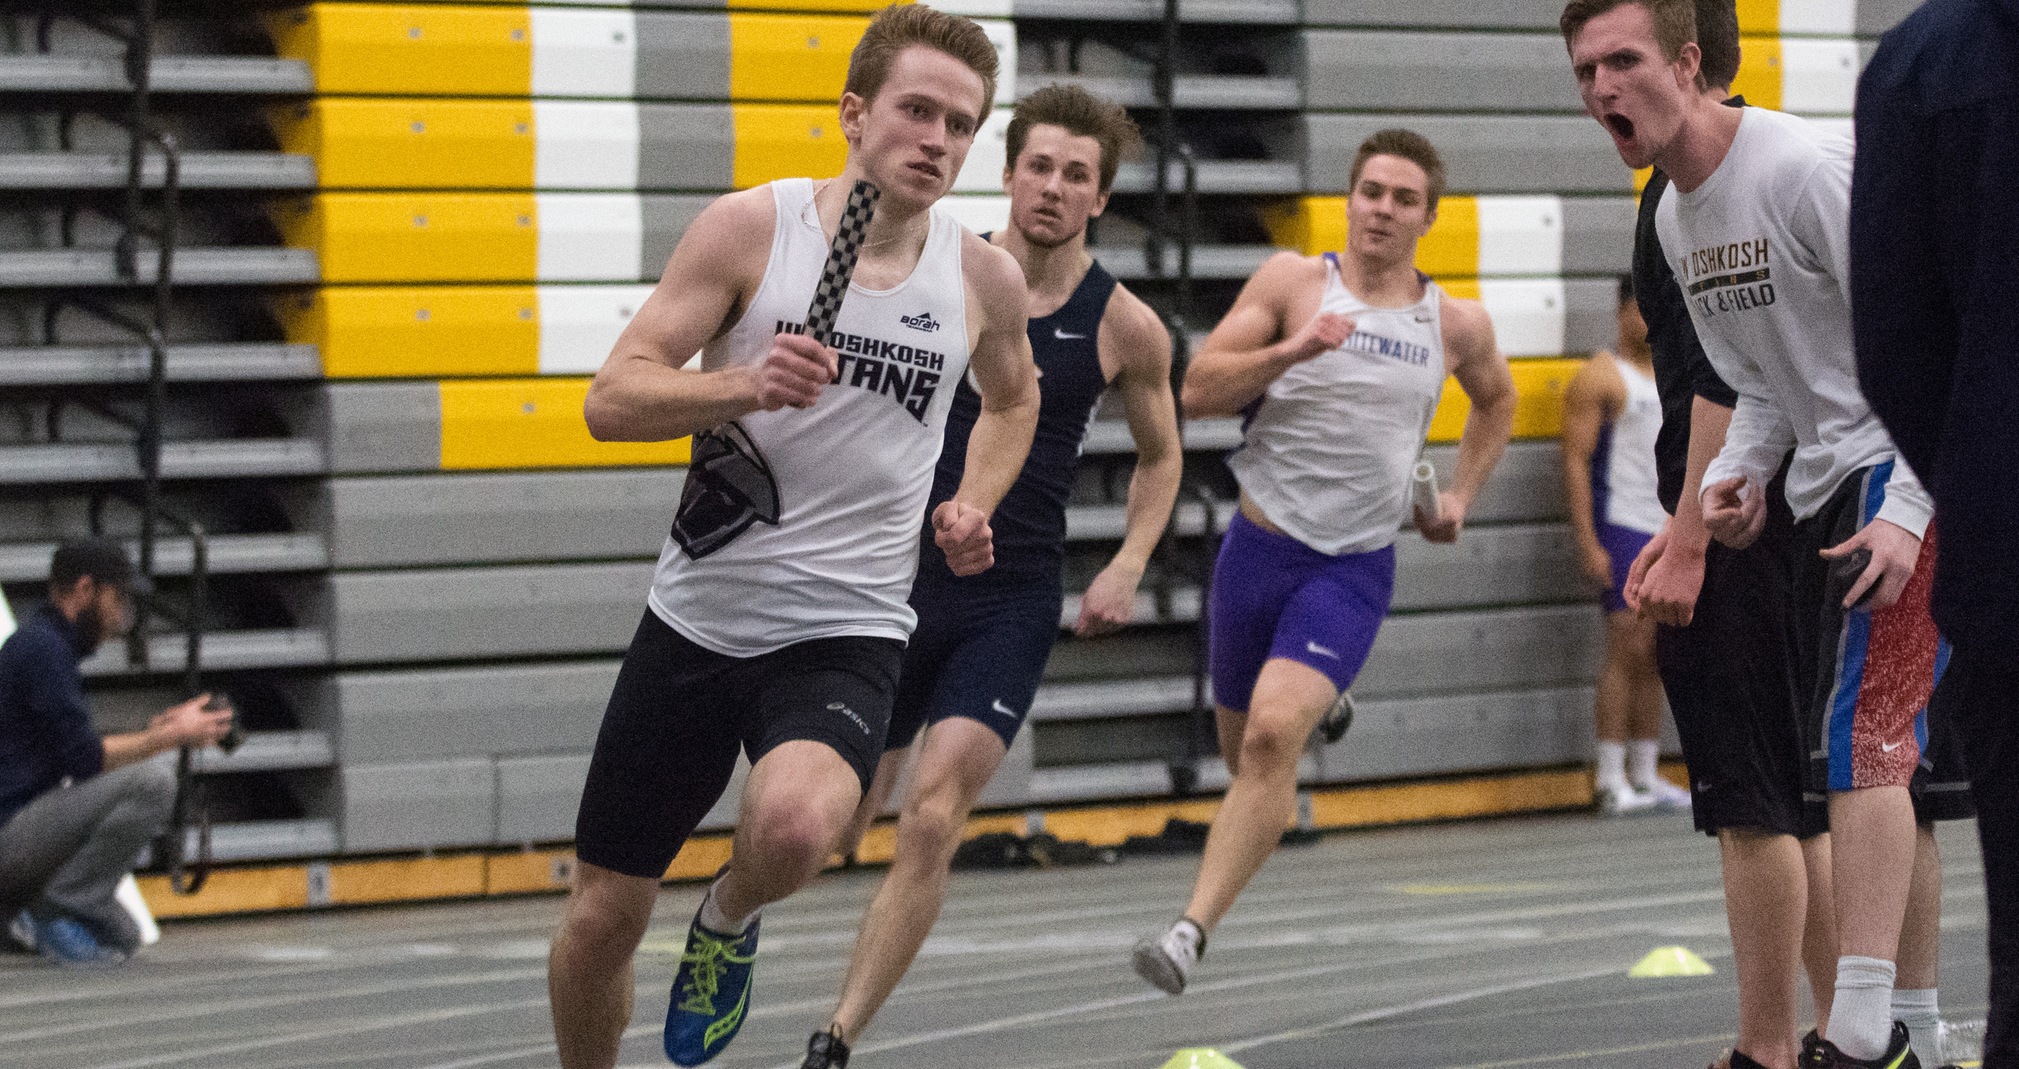 Ryan Powers helped the Titans win the 1,600-meter relay with a time of 3:18.20. The performance ranks second in the NCAA Division III this season.